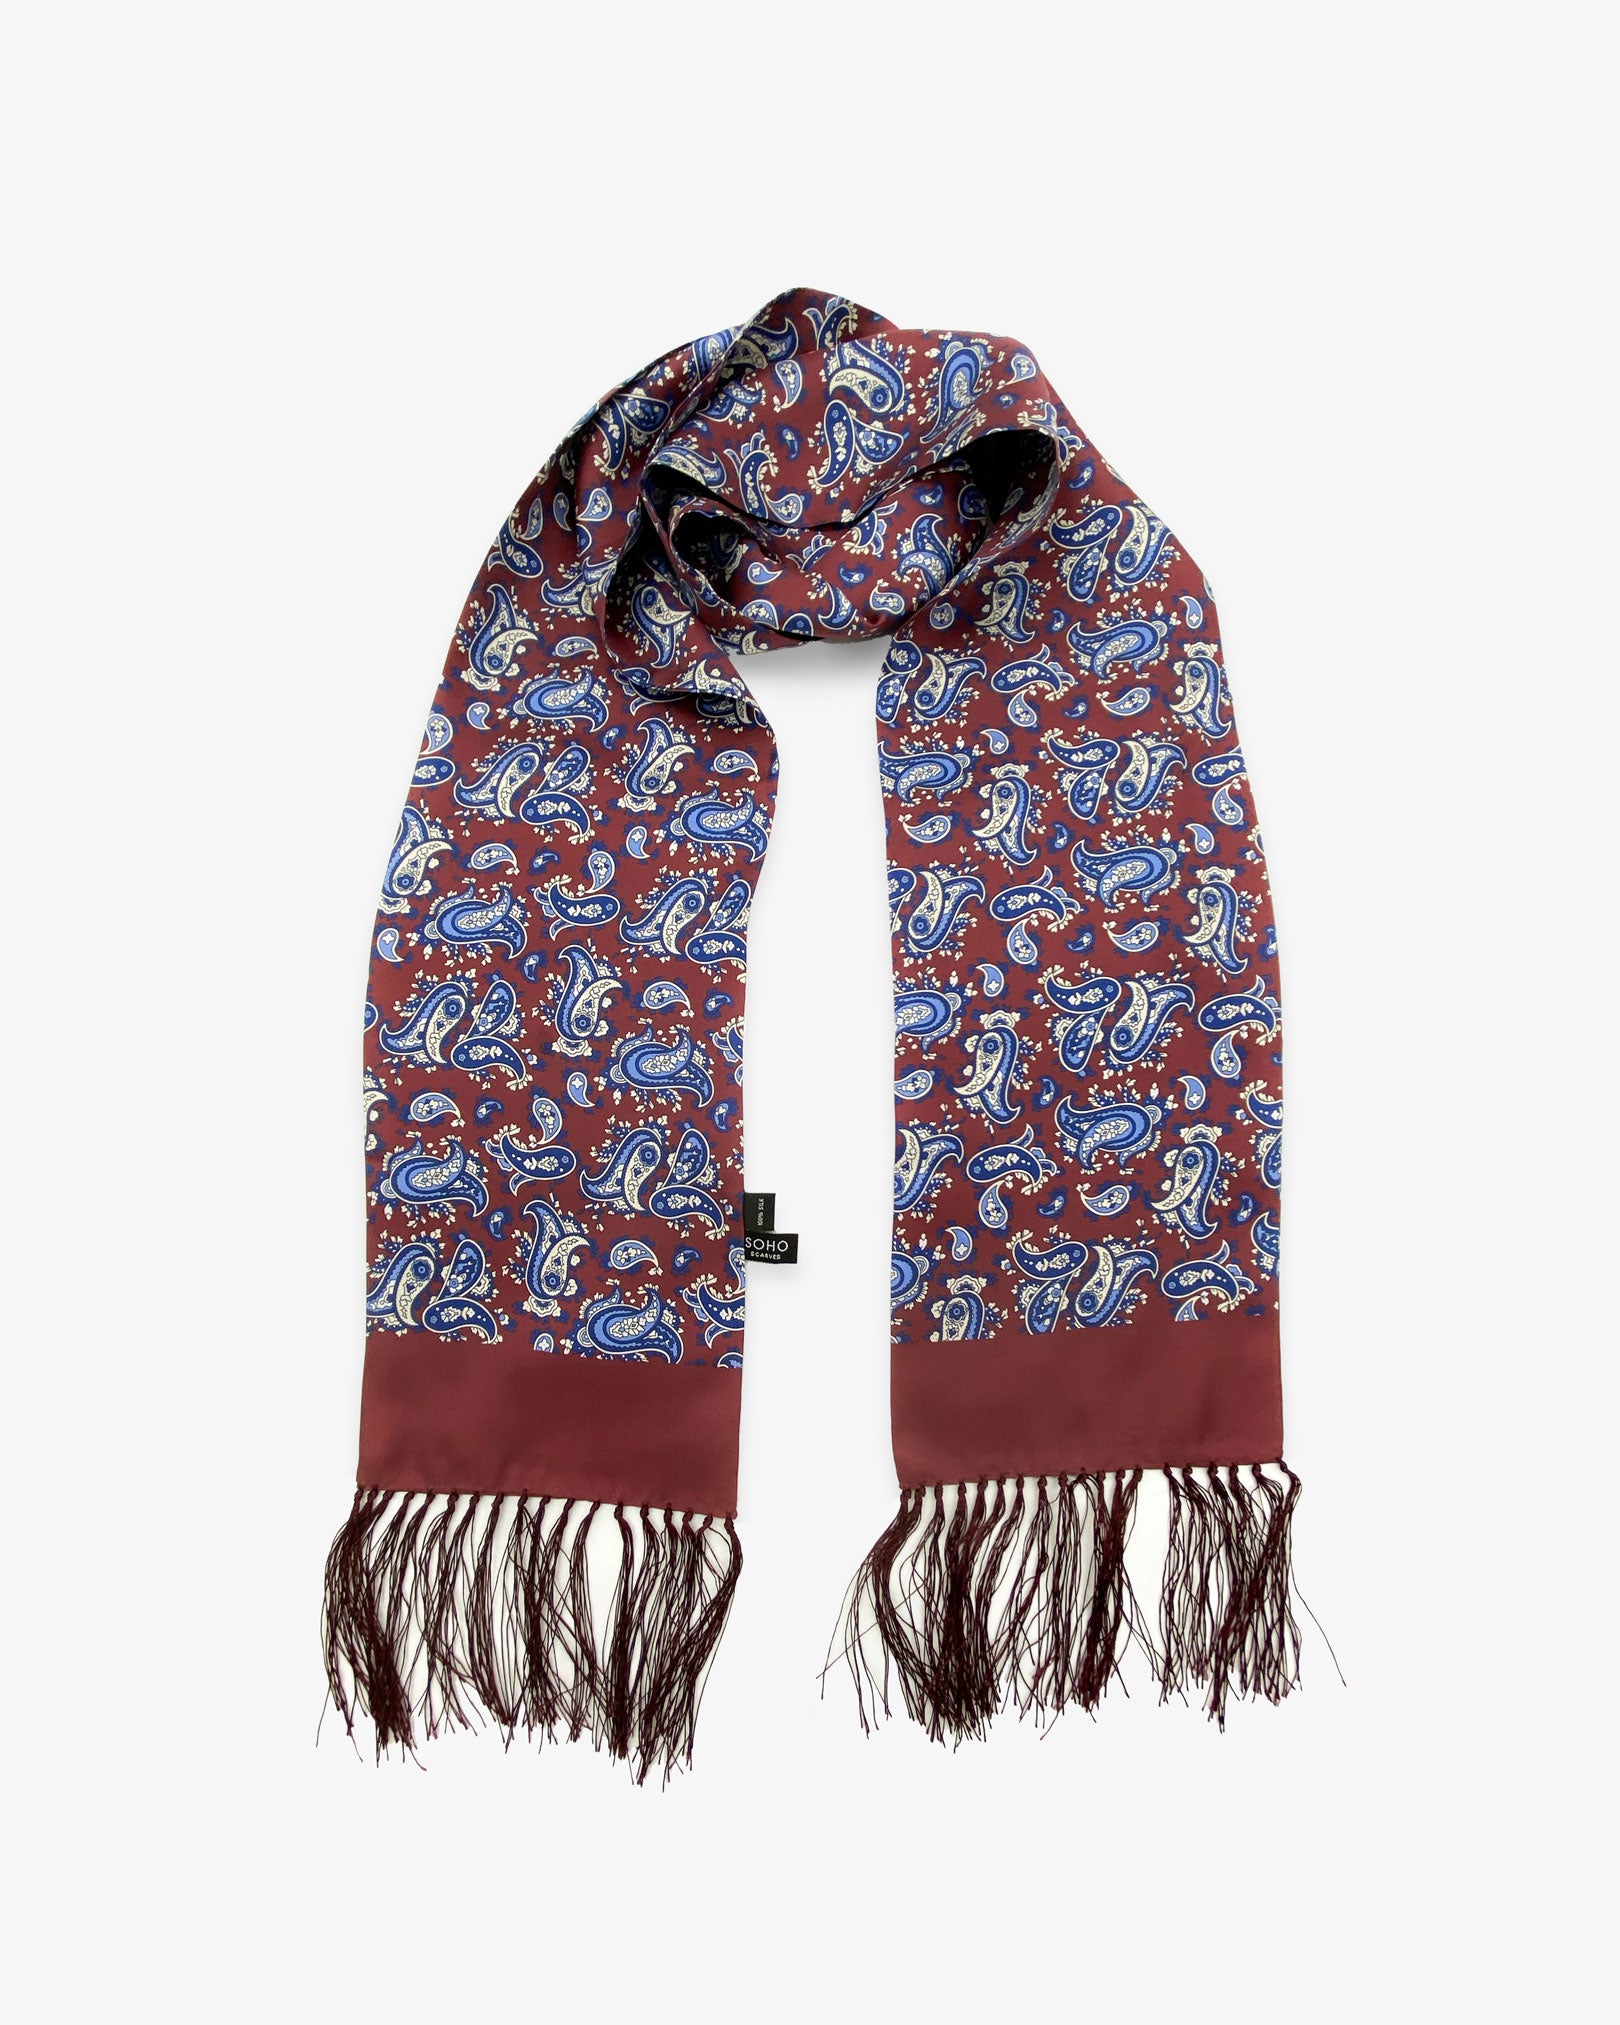 The Vancouver Aviator burgundy silk scarf with royal blue and cream paisley patterns, scarf looped in middle with both ends parallel clearly showing the deep-burgundy 3-inch fringe and the 'Soho Scarves' label.